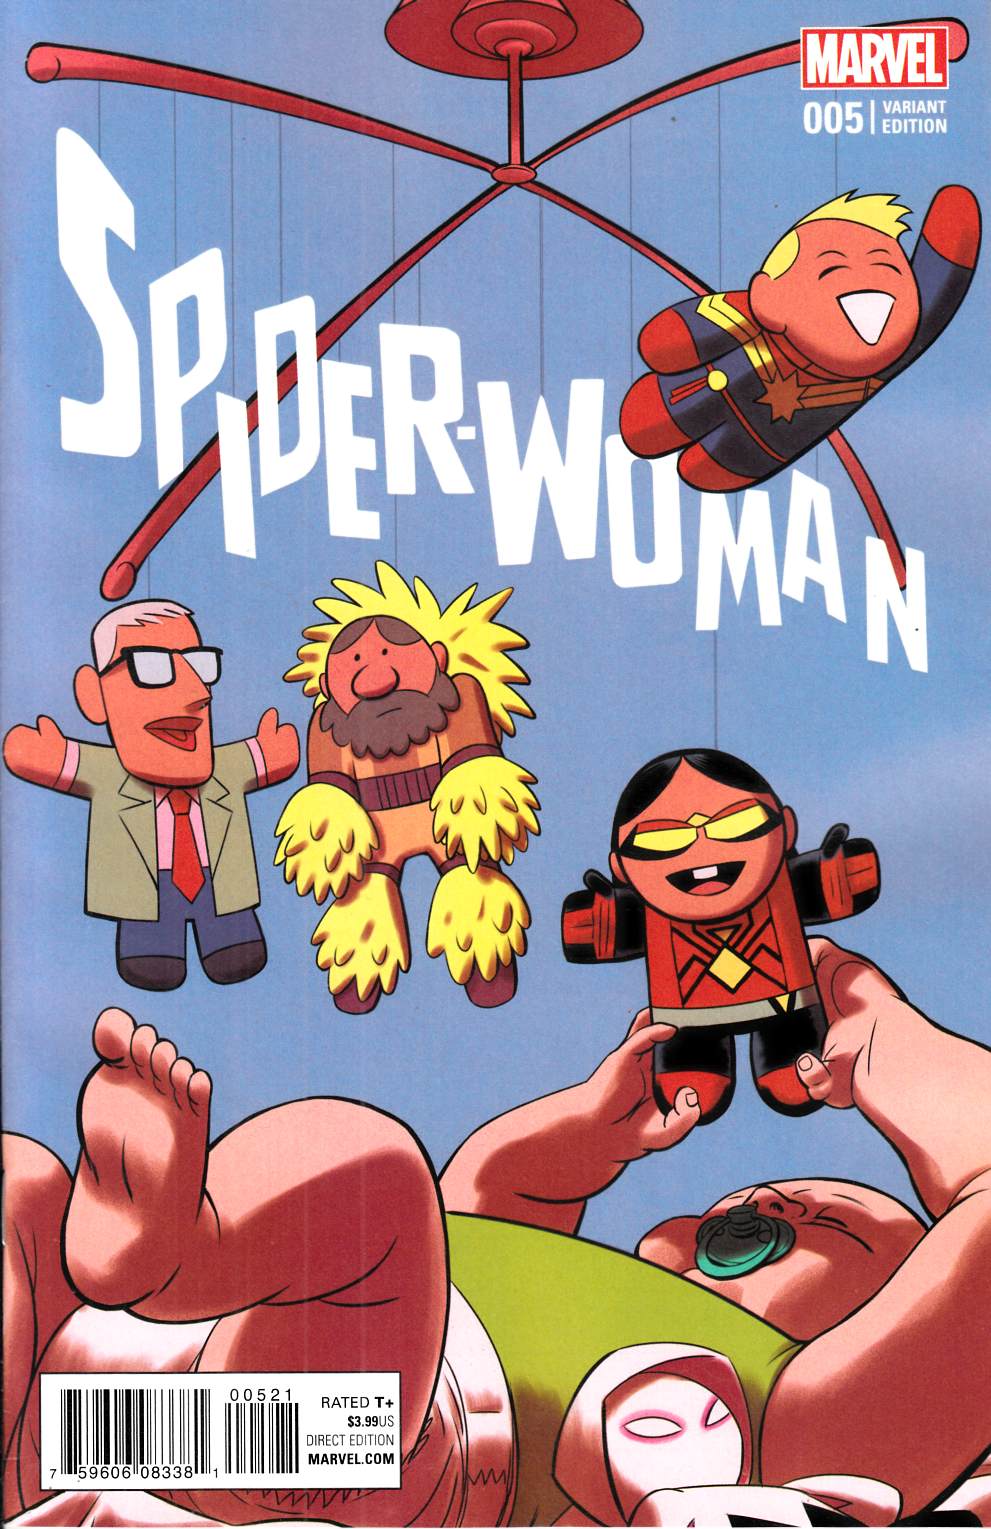 Spider woman variant cover